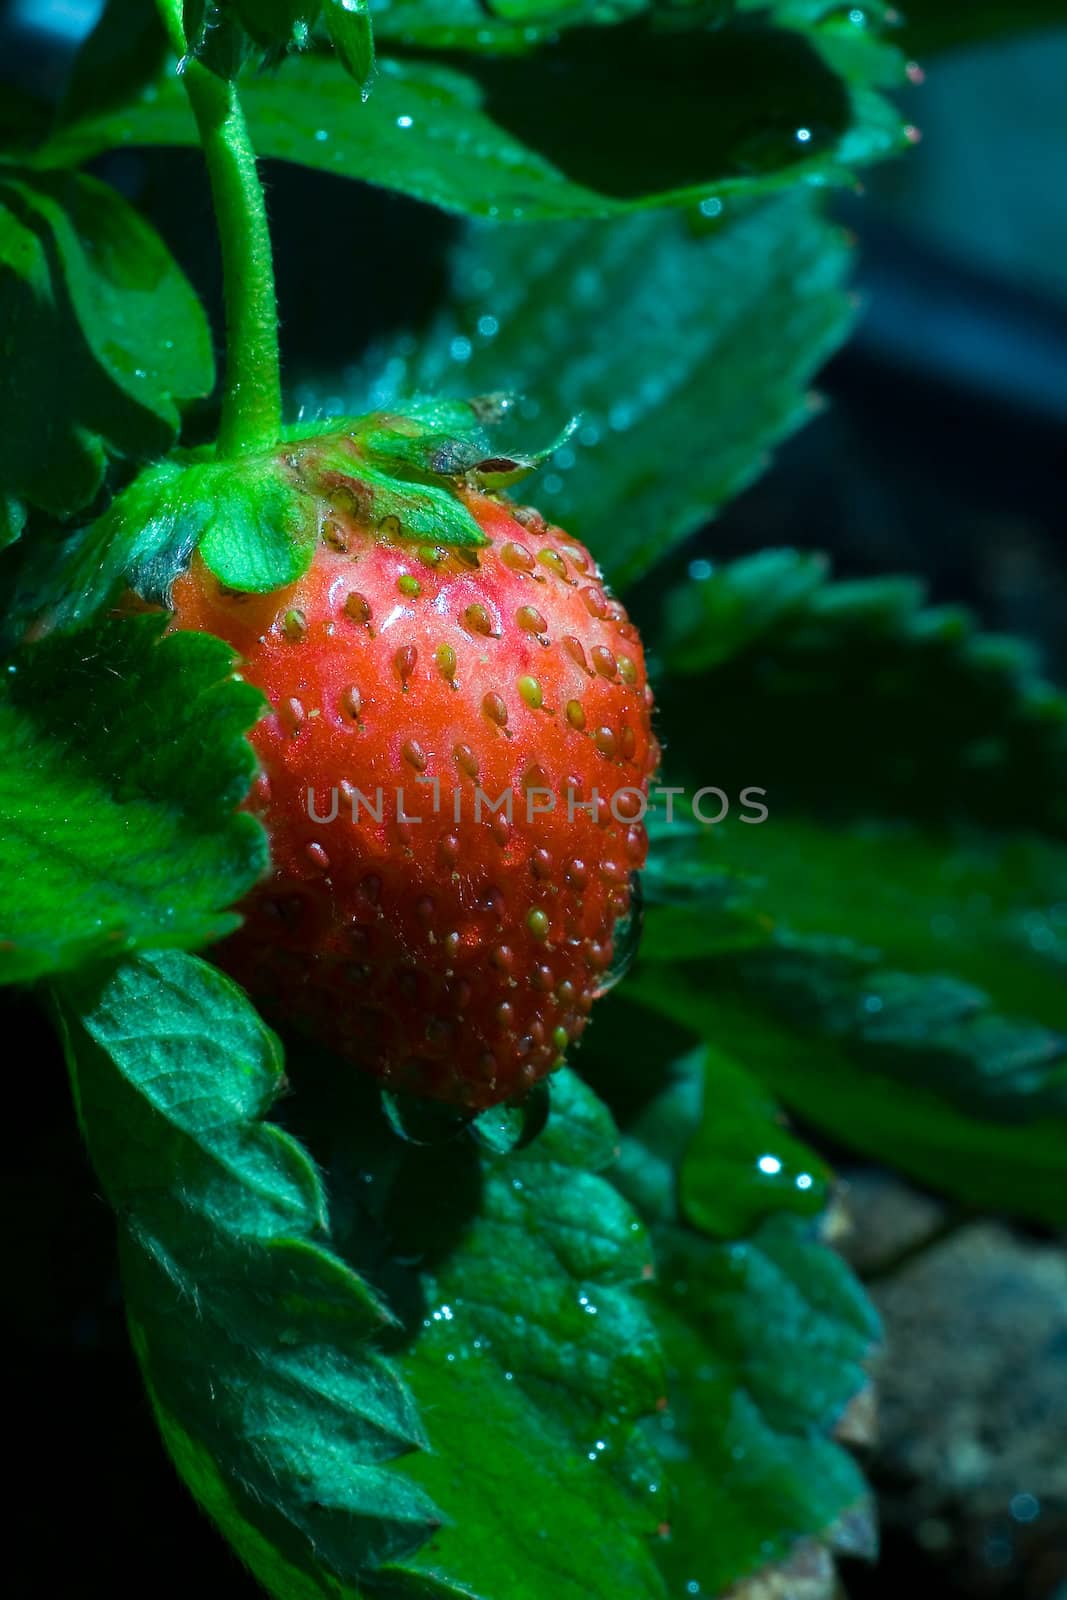 Thrickets of a strawberry.Photo with a bright red berry